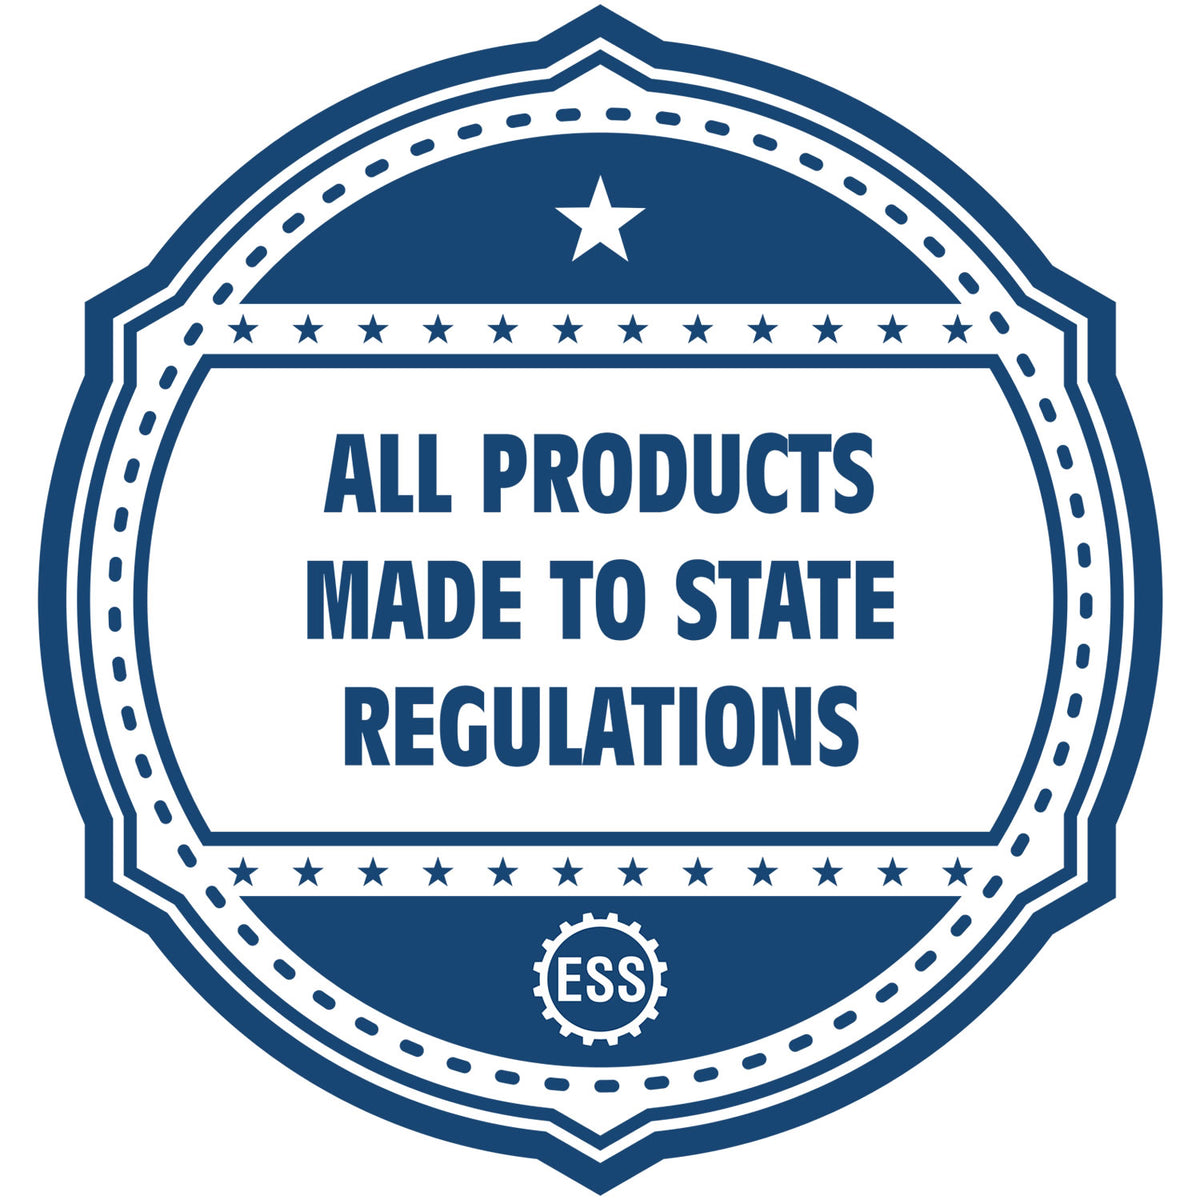 A blue icon or badge for the Hybrid Connecticut Landscape Architect Seal showing that this product is made in compliance with state regulations.